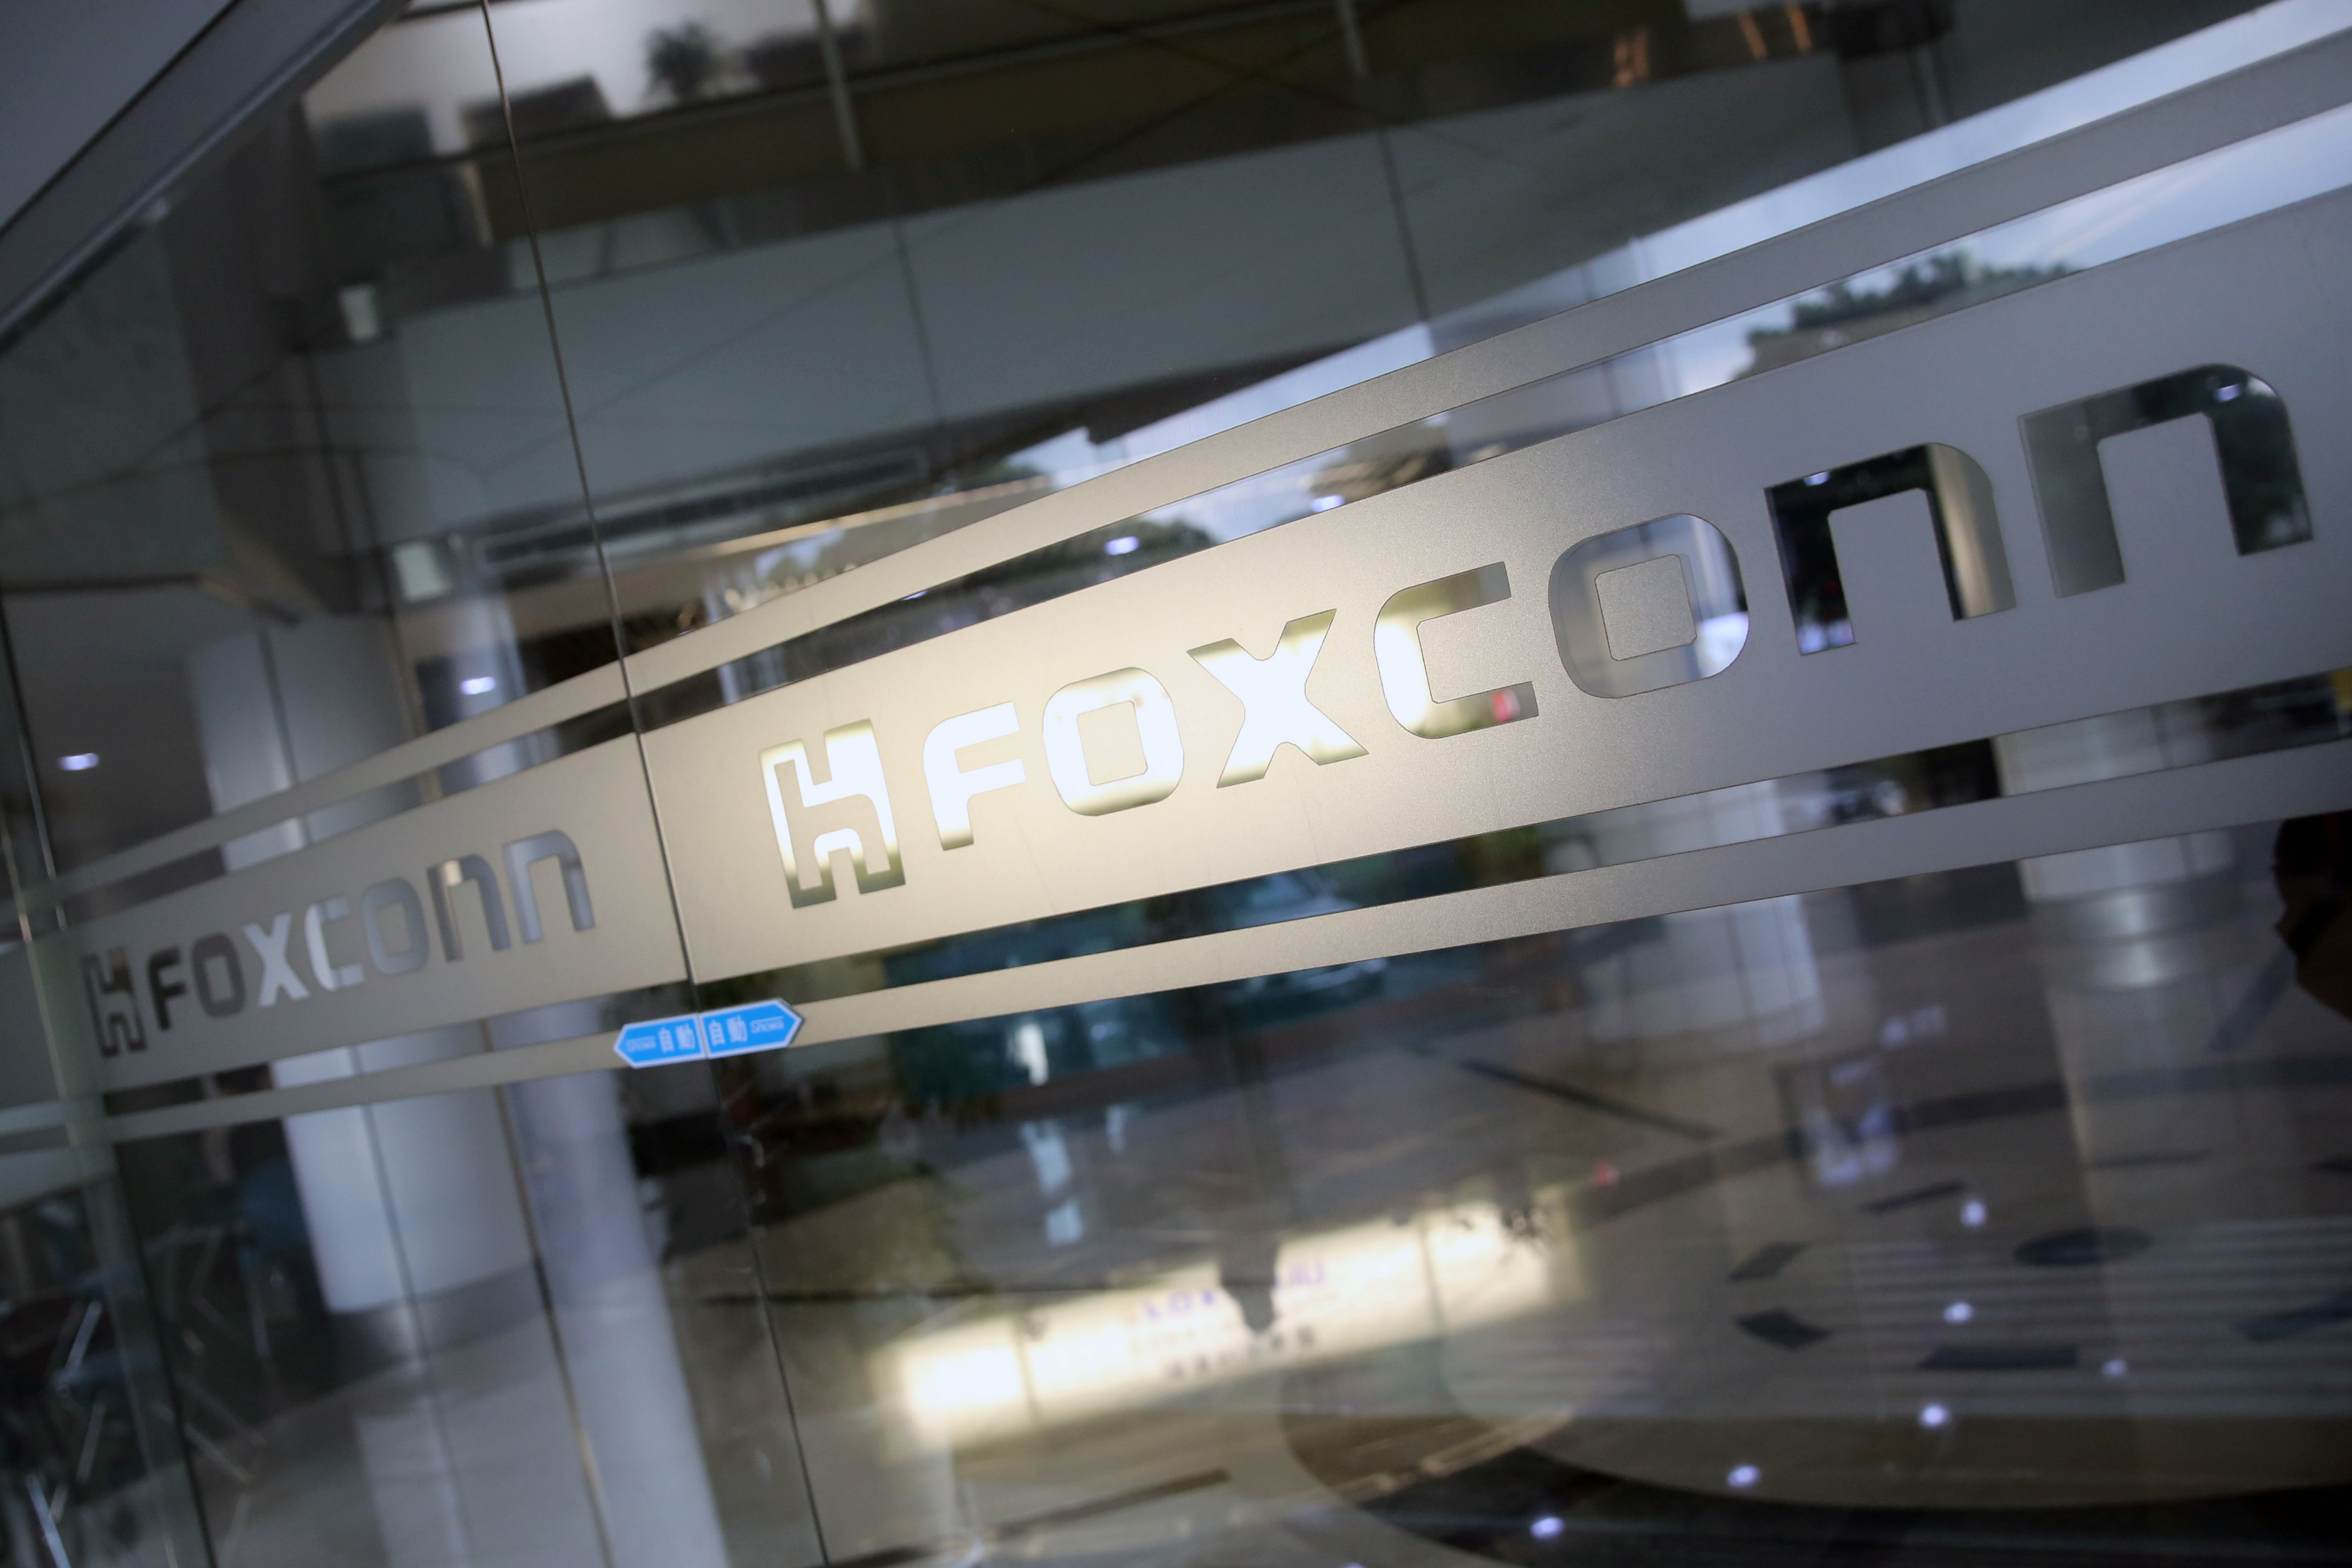 The logo of Foxconn, the trading name of Hon Hai Precision Industry, is seen at its headquarters in New Taipei City